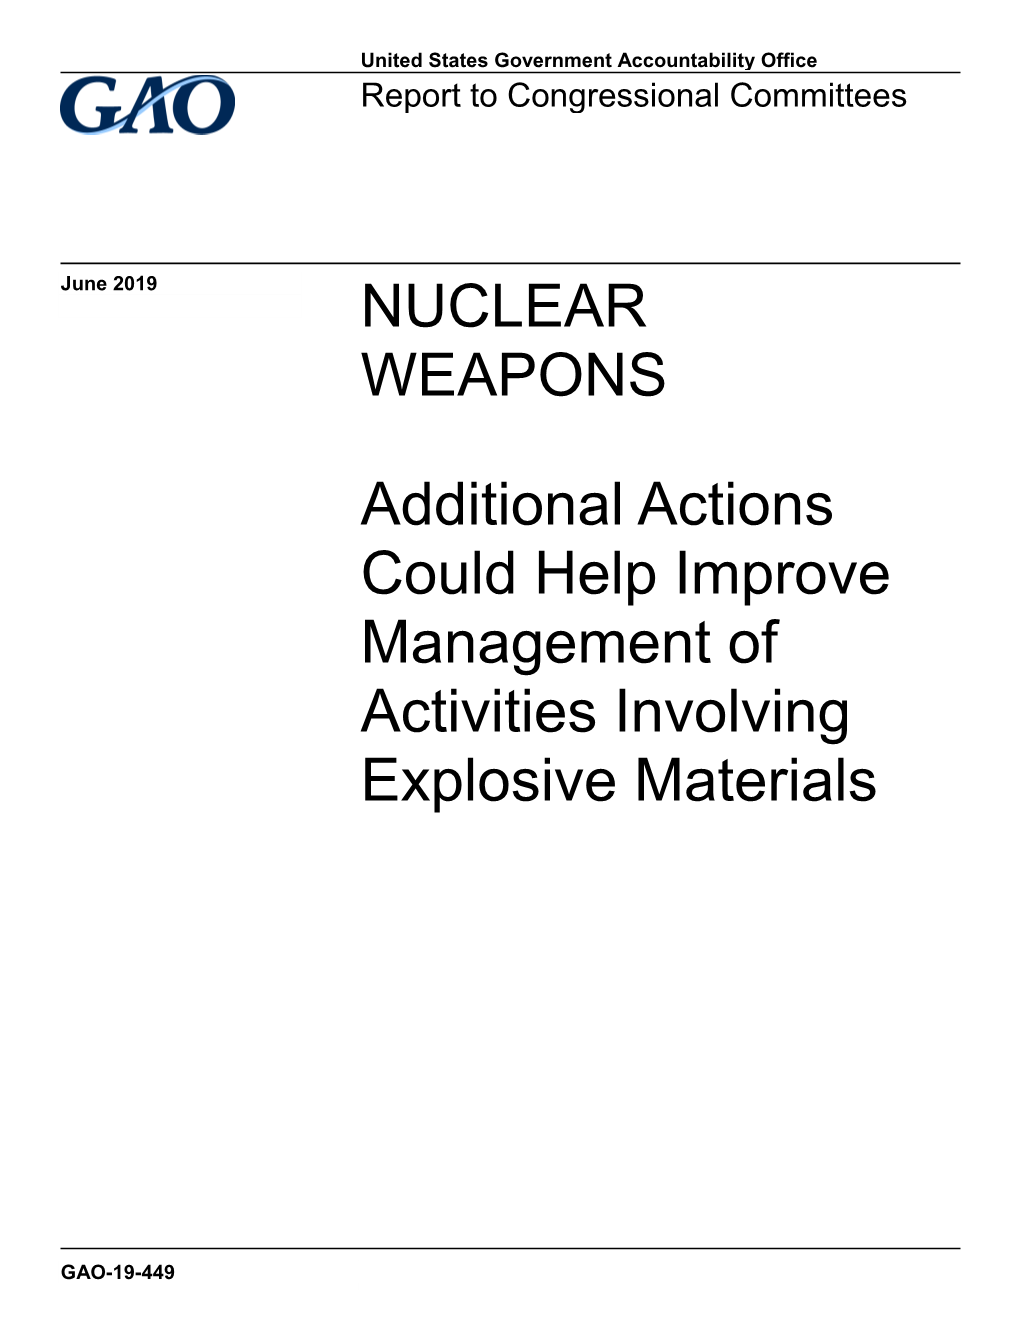 NUCLEAR WEAPONS: Additional Actions Could Help Improve